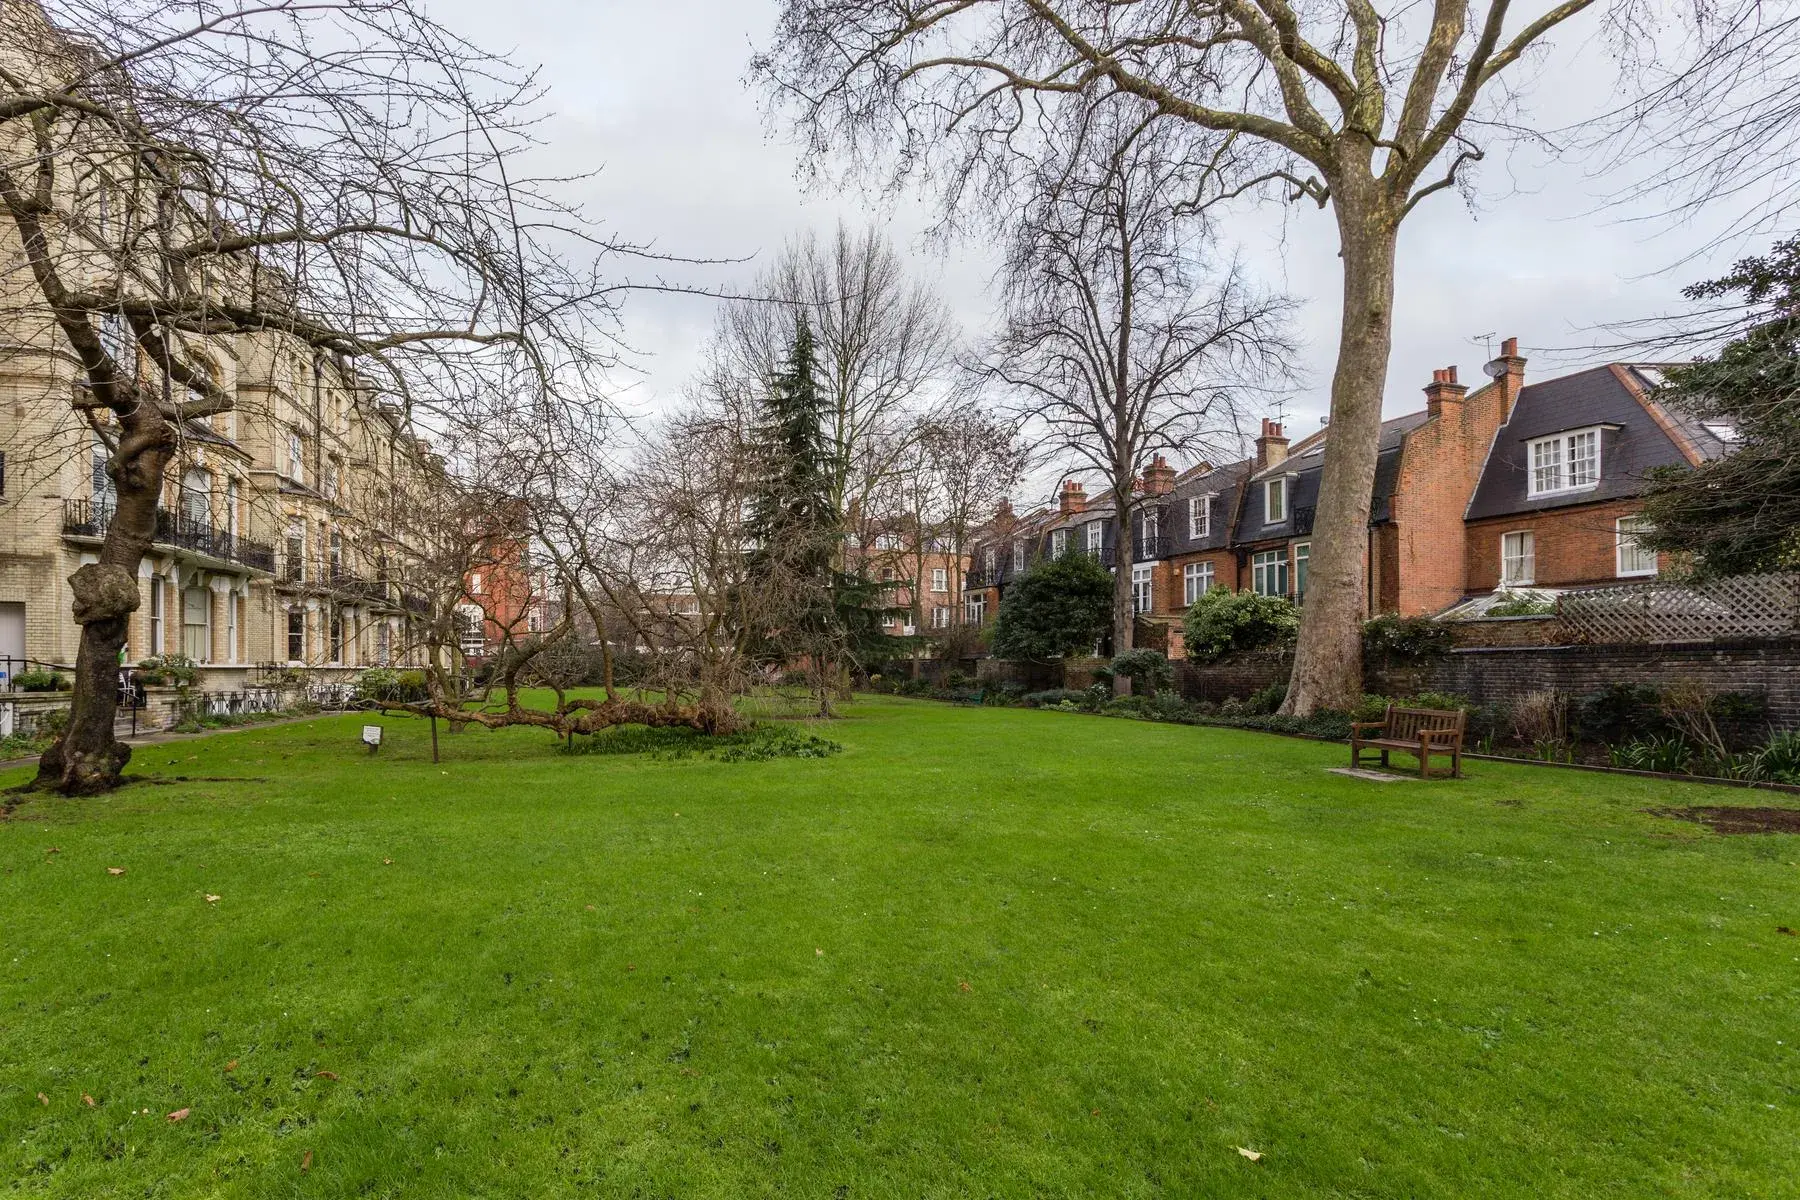 Elm Park Gardens , holiday home in Chelsea, London